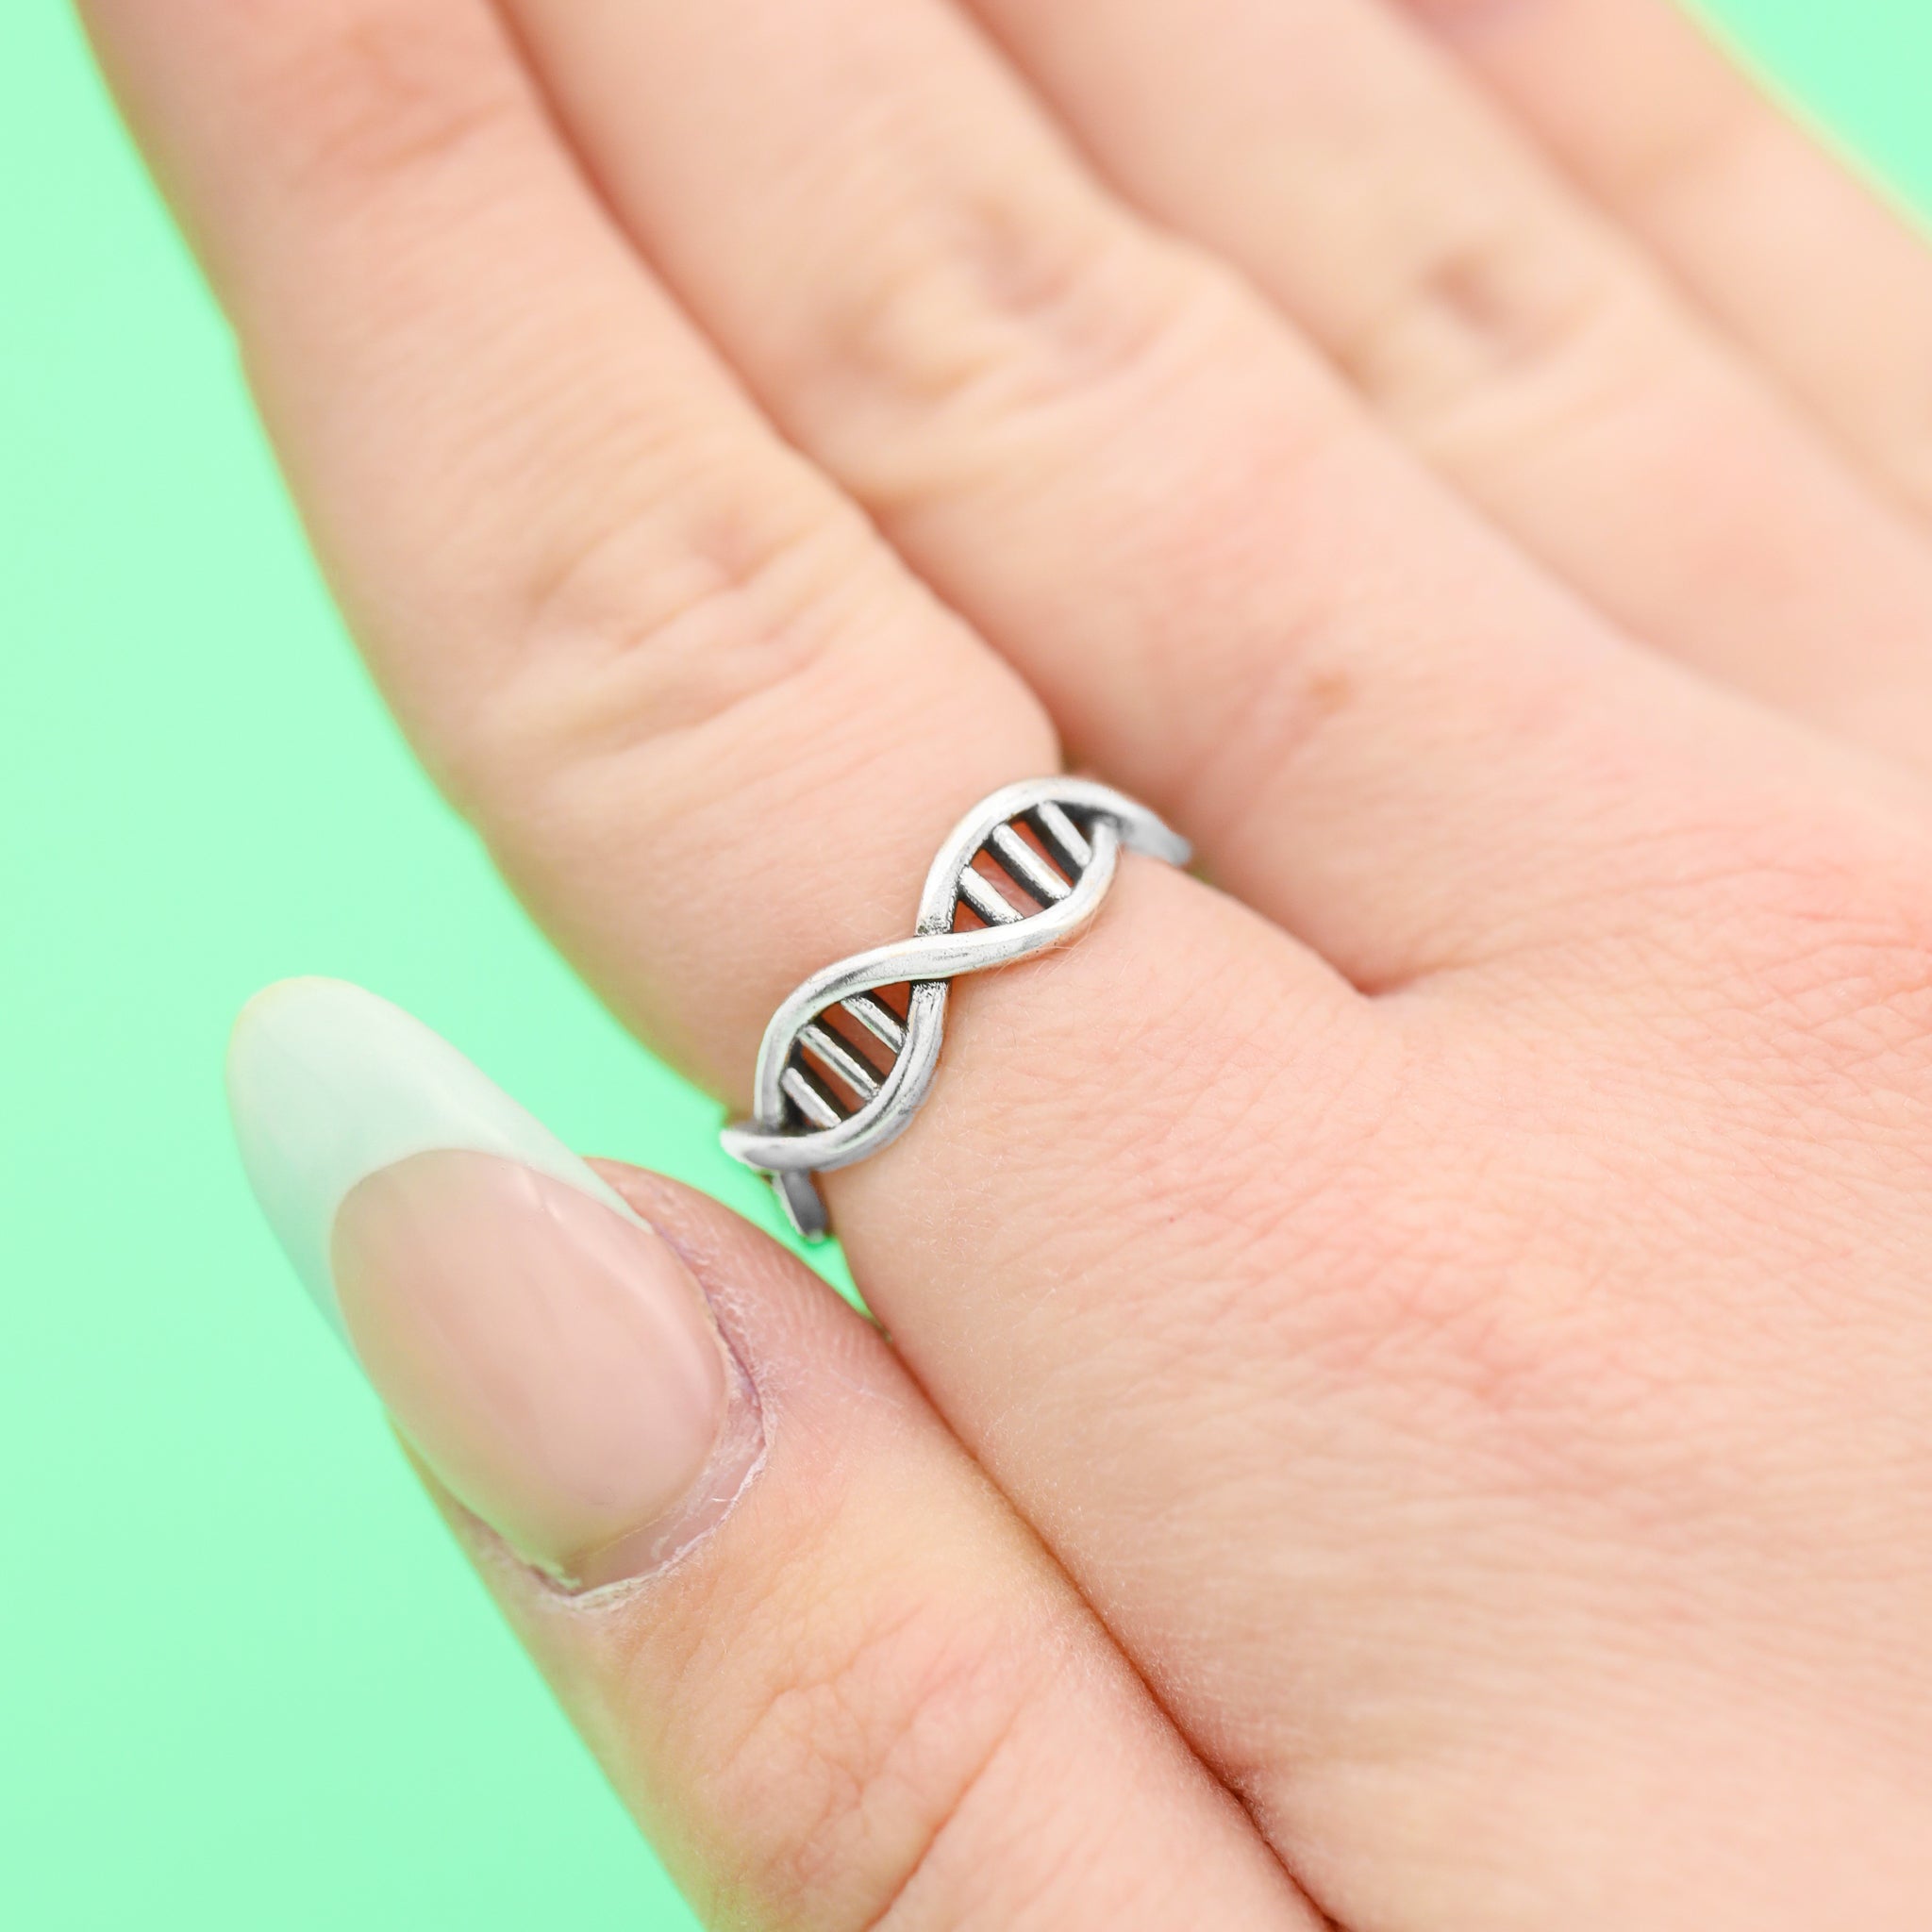 DNA Structure Double Helix Lab Science Geek Ring | eBay